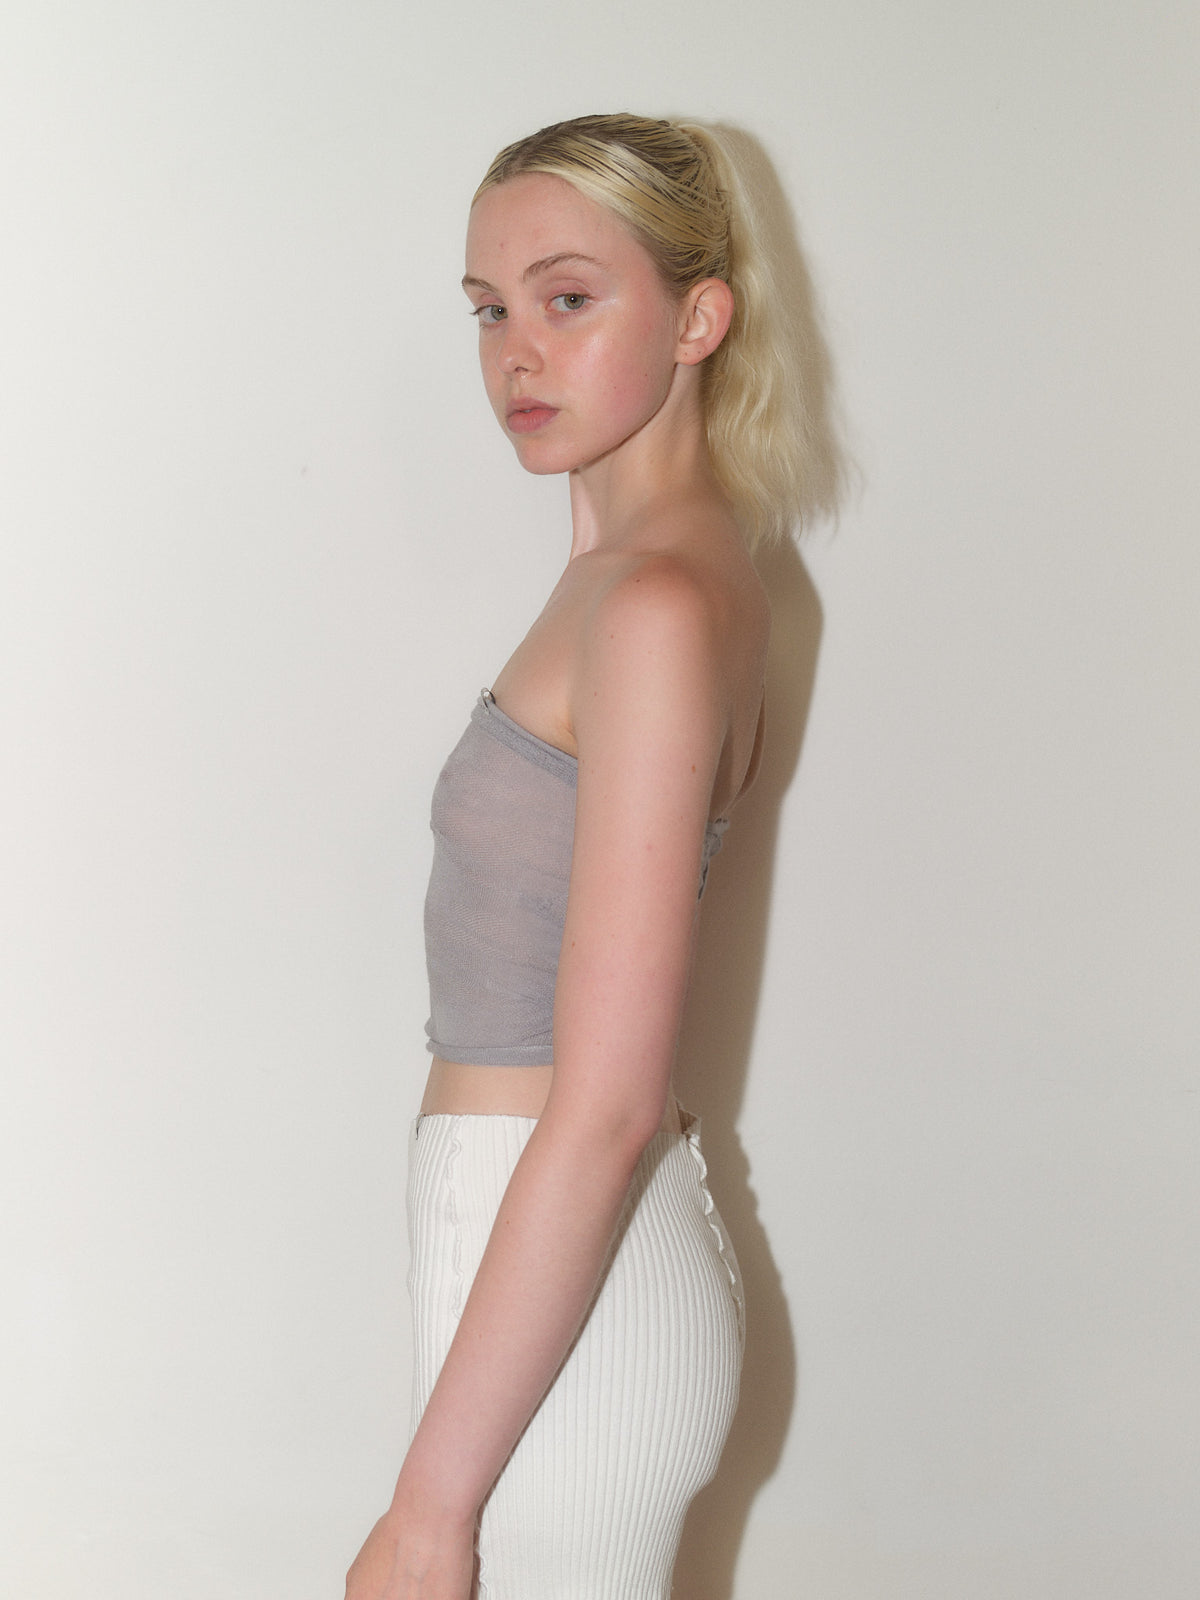 Knitted Sheer Tube Top designed by Christina Seewald. Sustainable, designed and made in Europe. Best Quality Yarns from Italy.